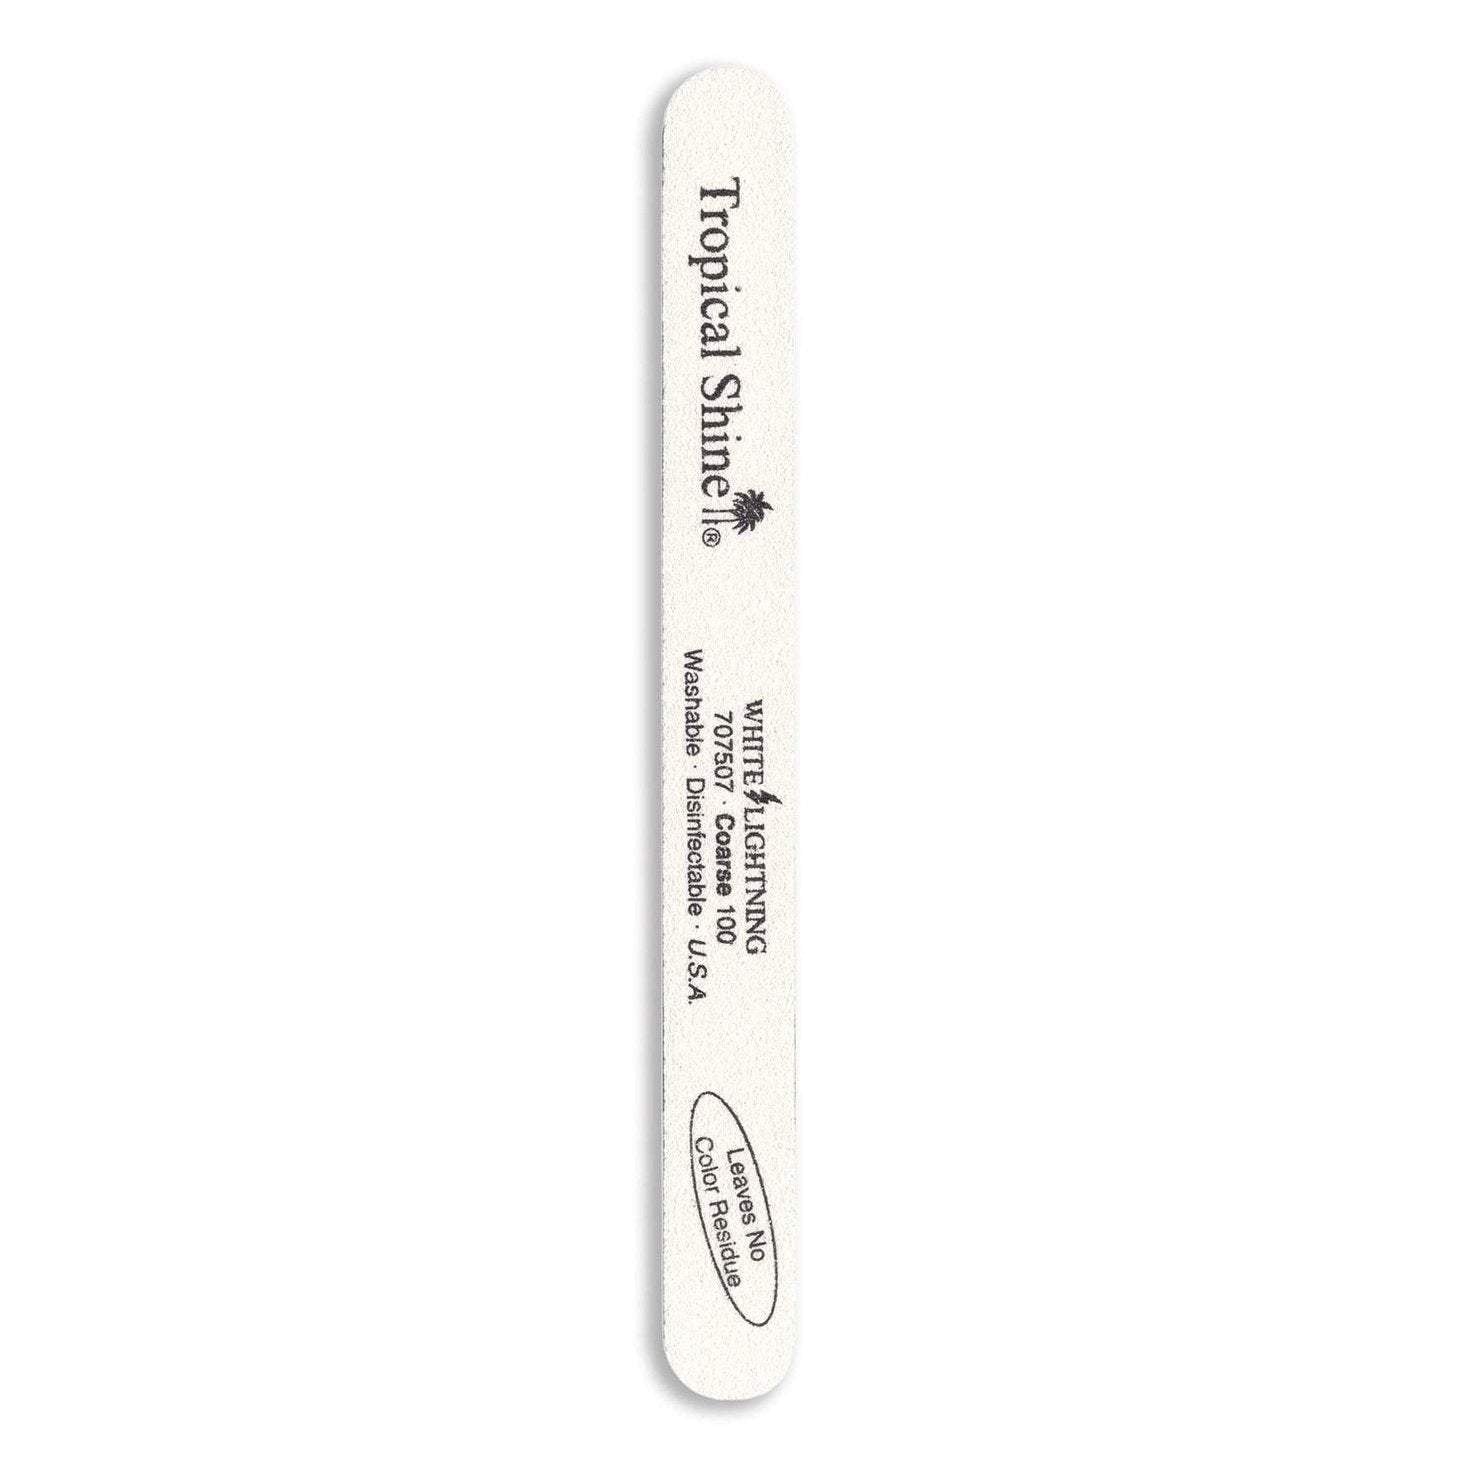 Tropical Shine Nail File White Lightning File 100 (Coarse) 7 1/2 in x 3/4 in Large Size (707507)-Tropical Shine-Brand_Tropical Shine,Collection_Nails,Nail_Tools,Tool_Nails